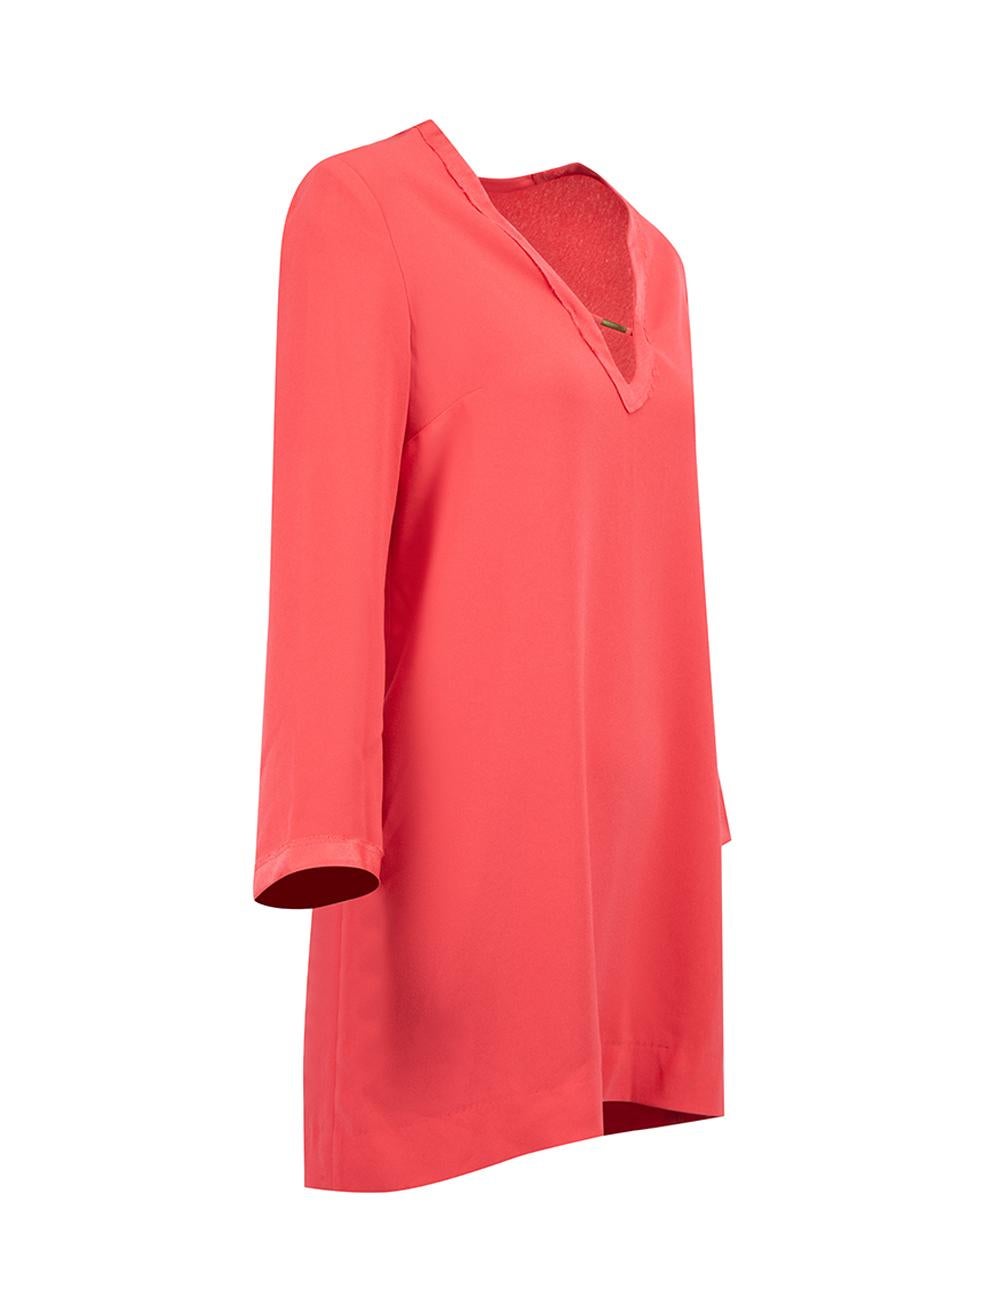 CONDITION is Very good. Hardly any visible wear to dress is evident on this used Maje designer resale item. Please note however that this garment incorporates raw hem finishes at the cuffs and neck.



Details


Coral

Synthetic

Tunic top

Long